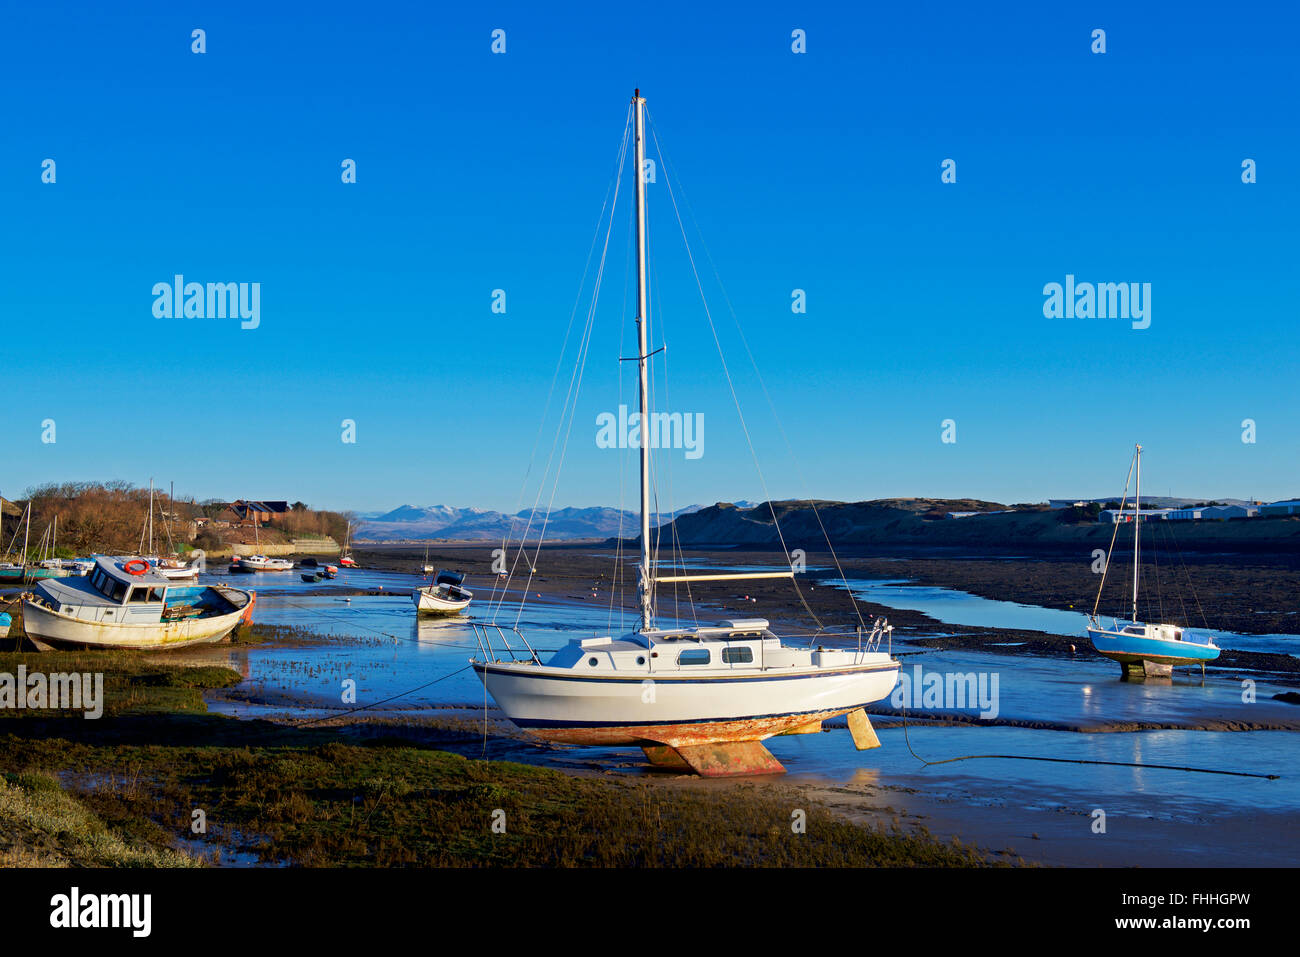 Boats in the Walney Channel, between Walney Island and Barrow-in-Furness, Cumbria, England UK Stock Photo